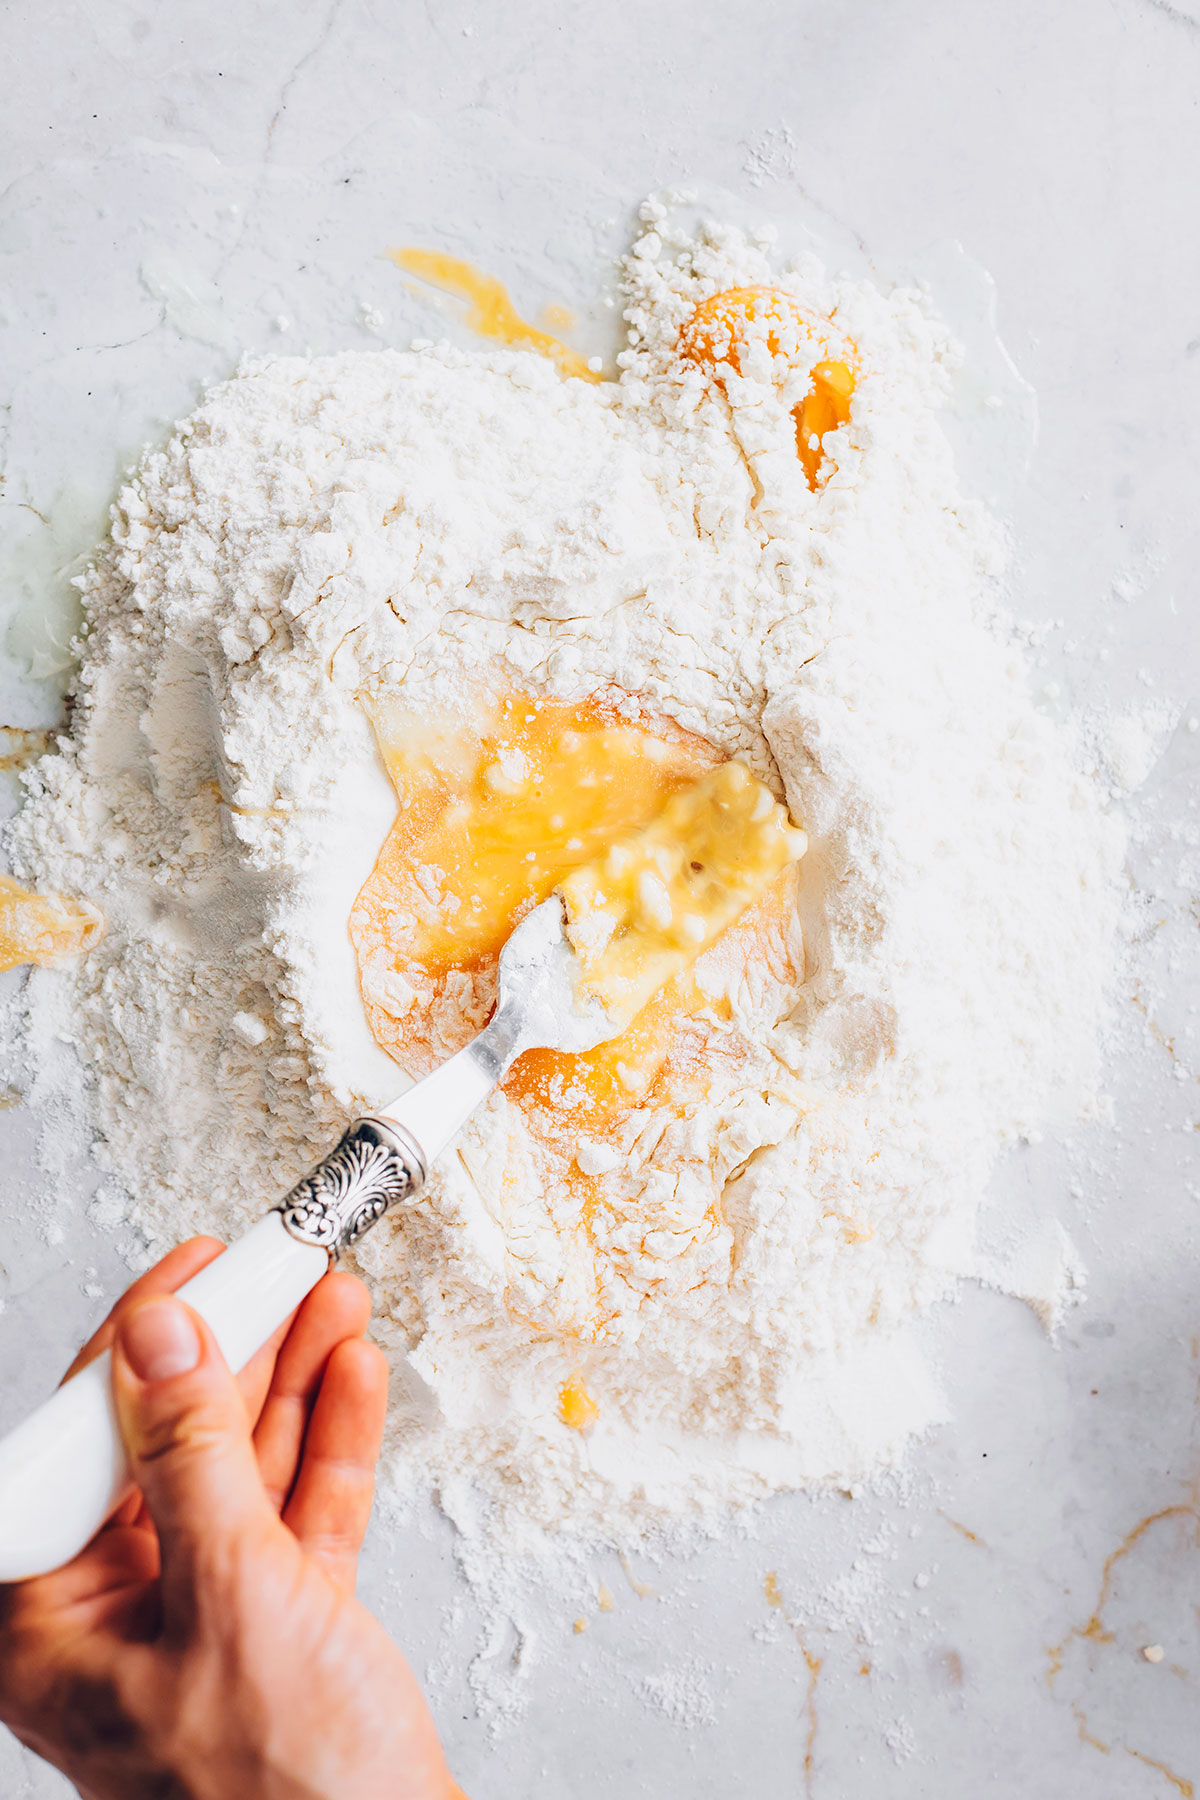 Mixing flour and eggs for homemade pasta